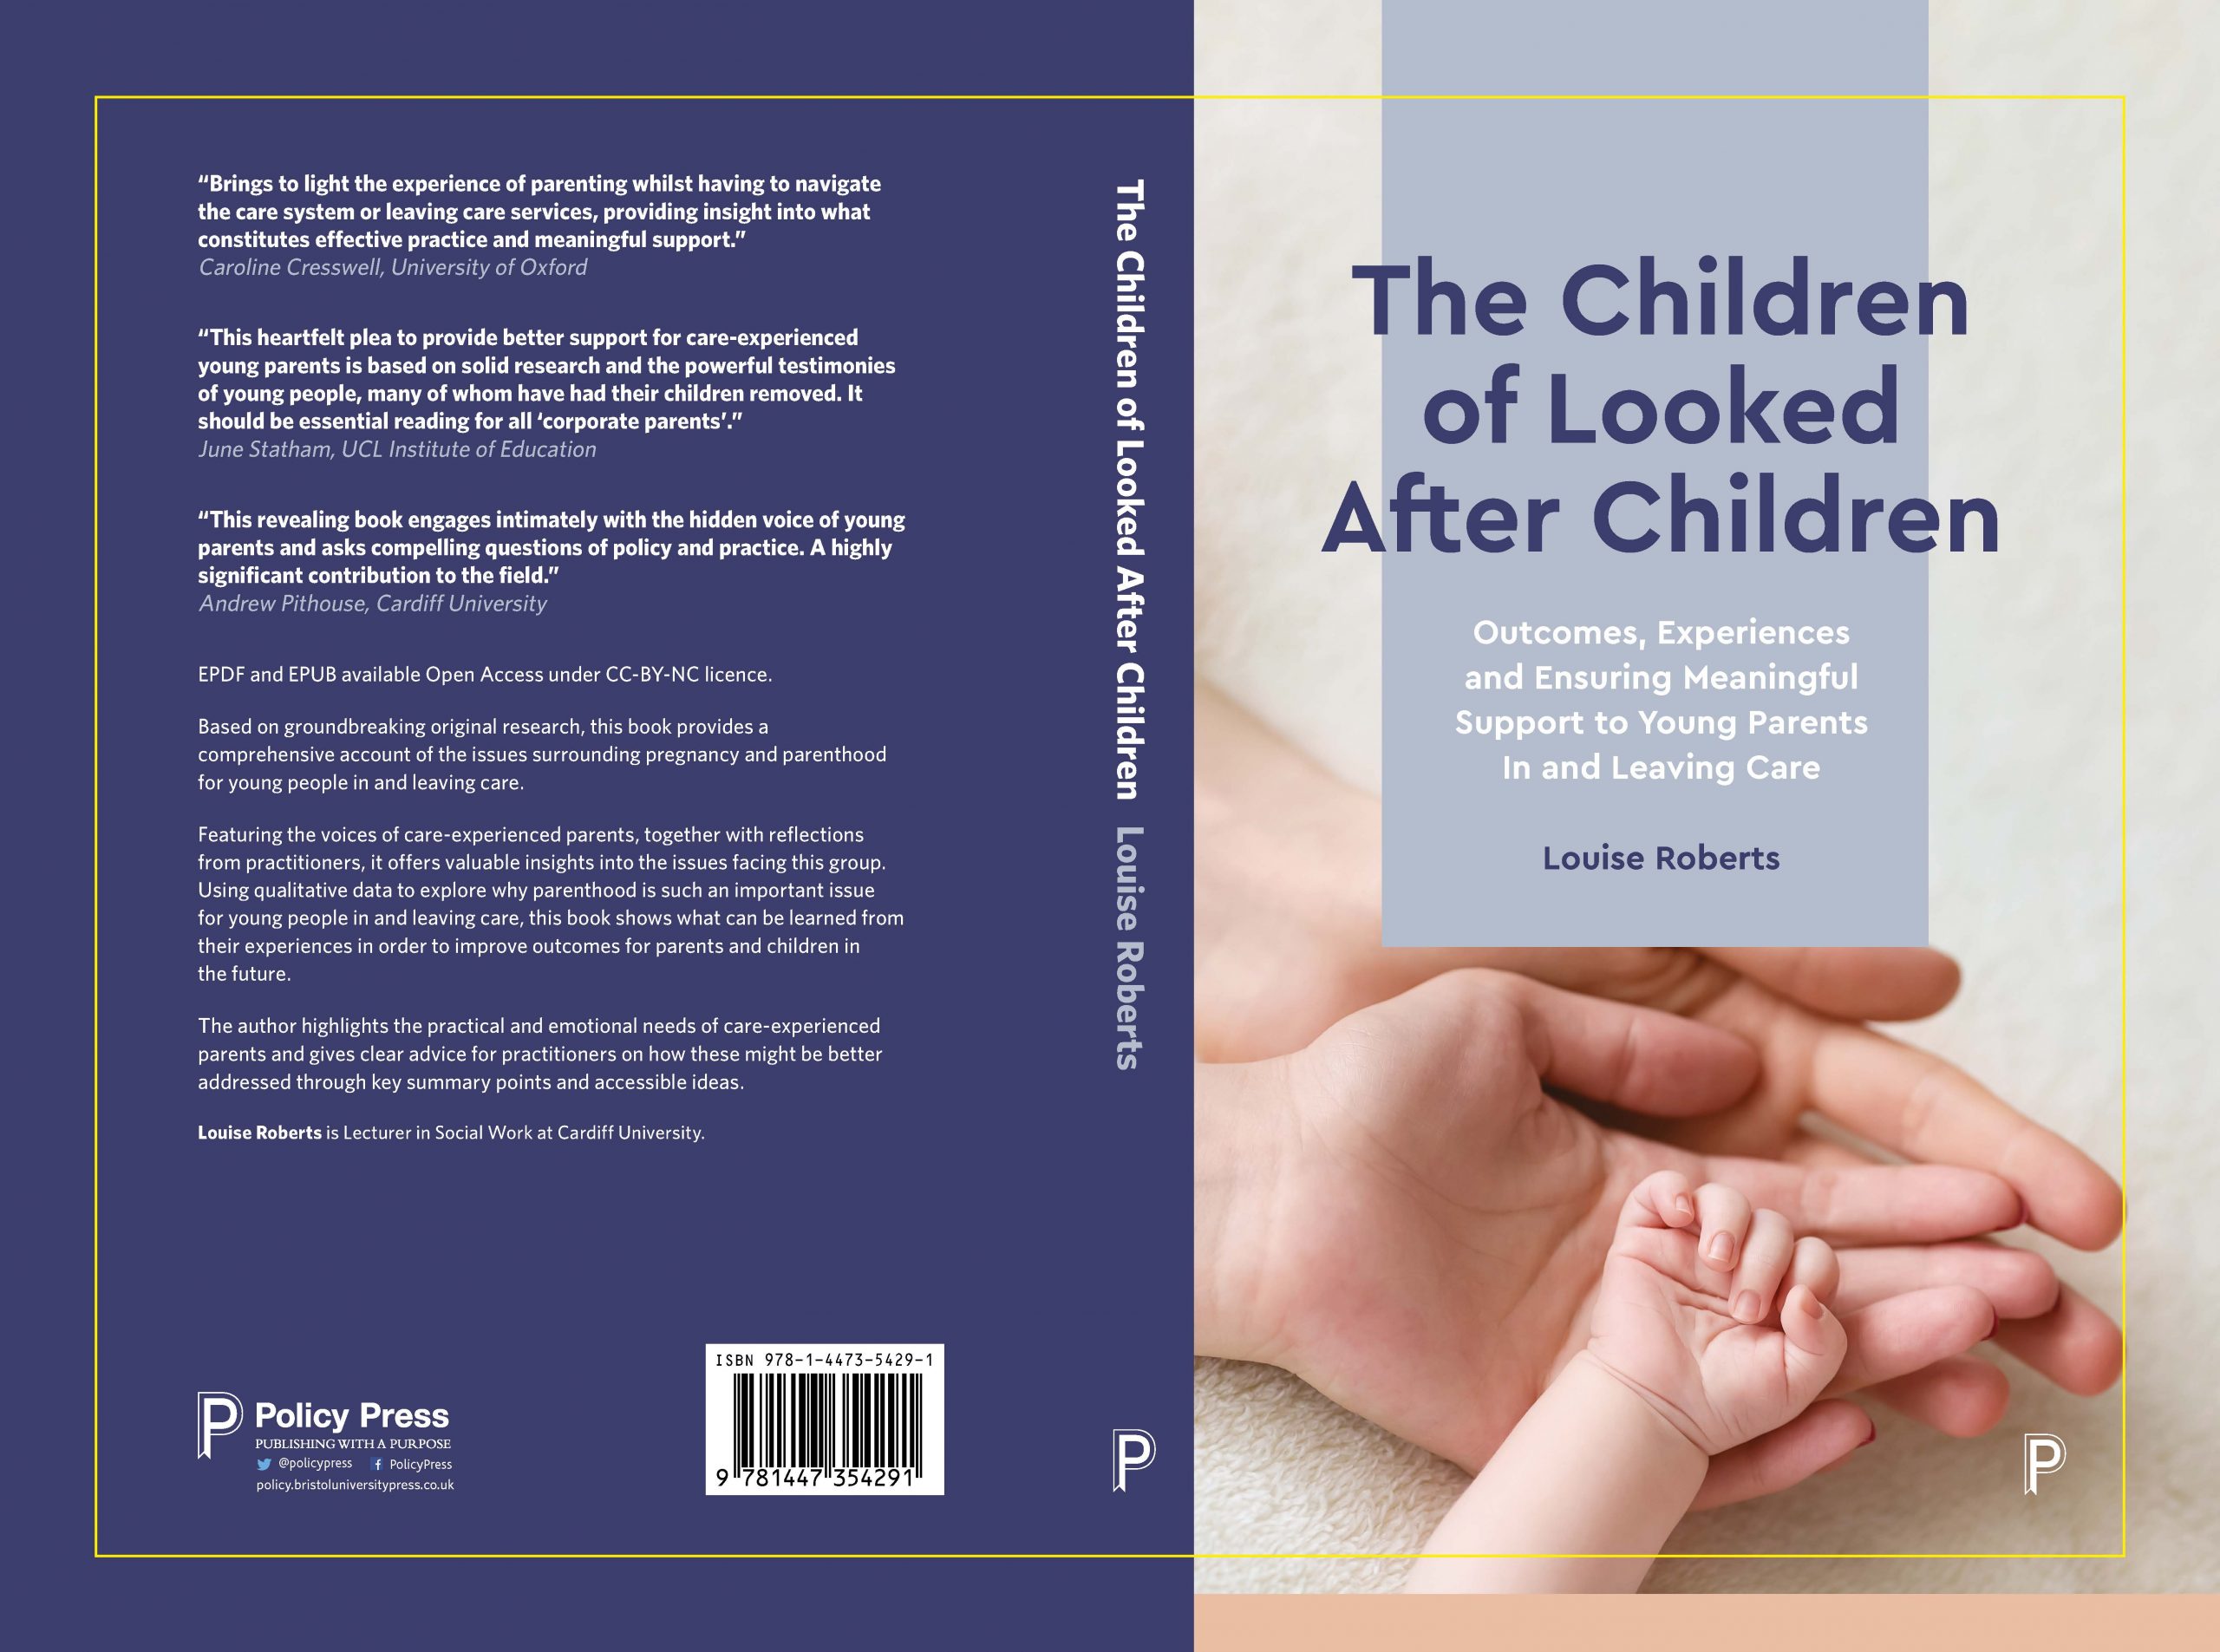 Photo of the book cover for Louise Roberts' book 'The Children of Looked After Children'